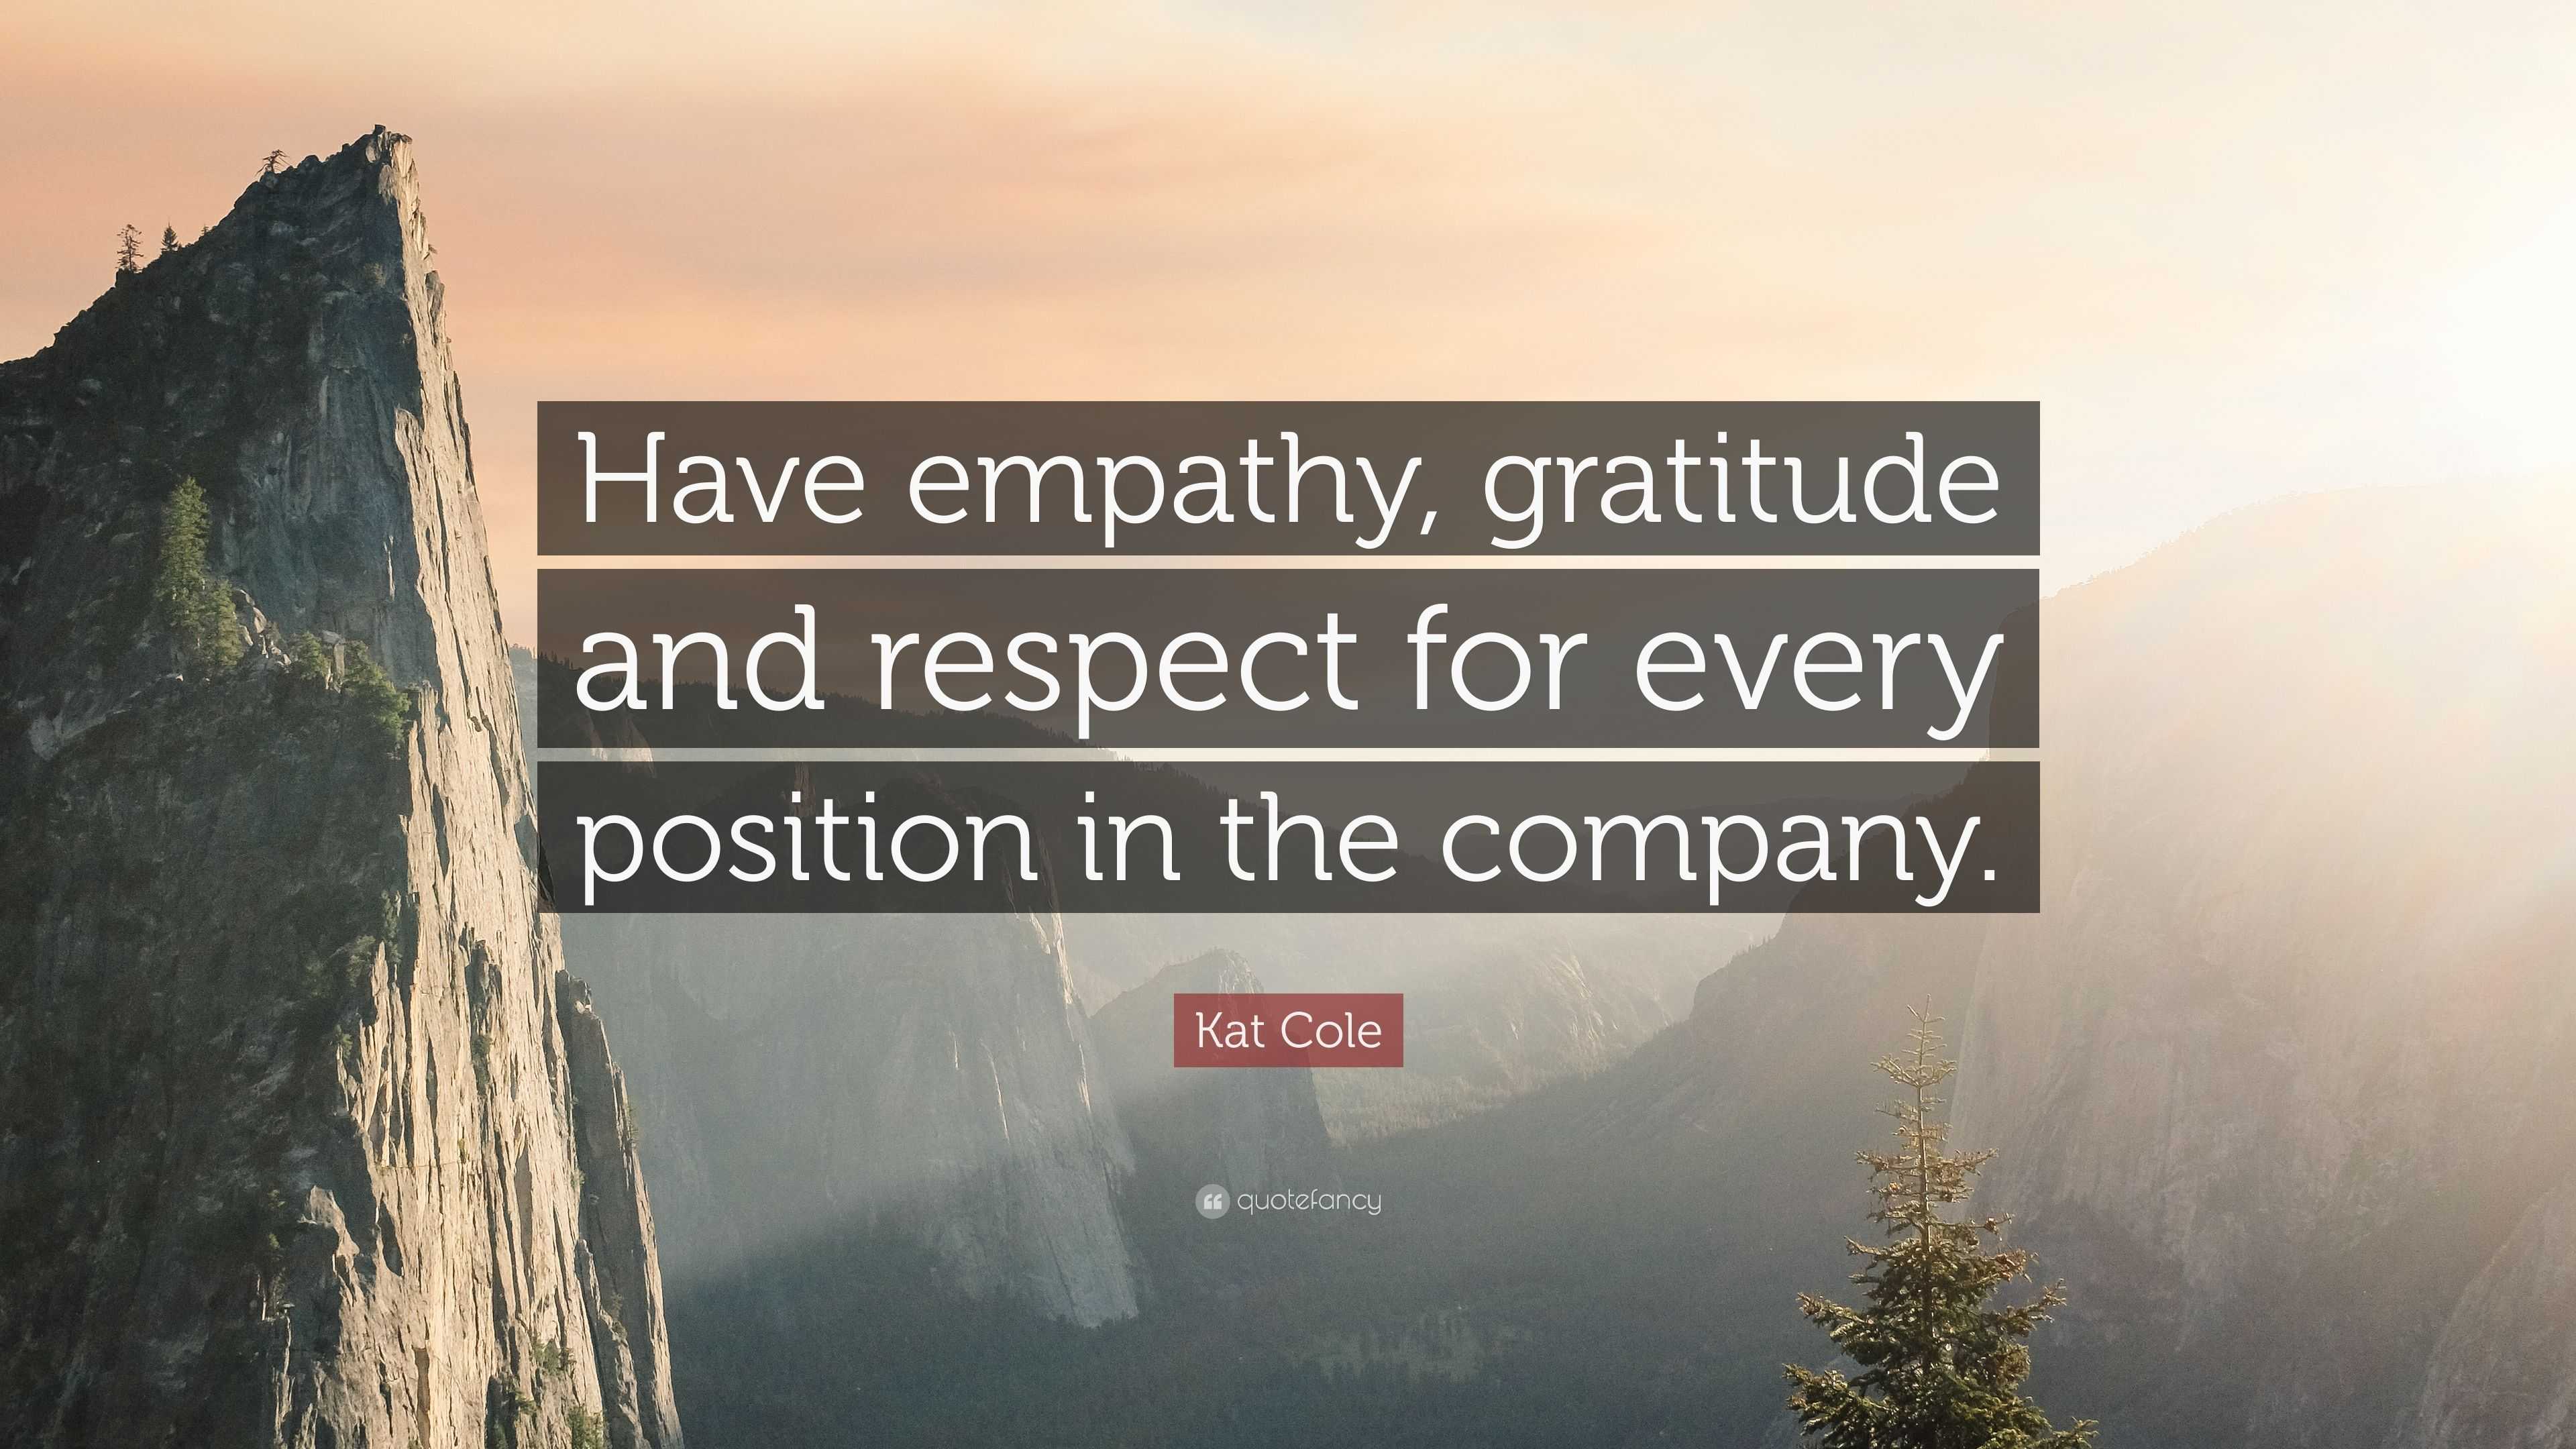 Kat Cole Quote: “Have empathy, gratitude and respect for every position